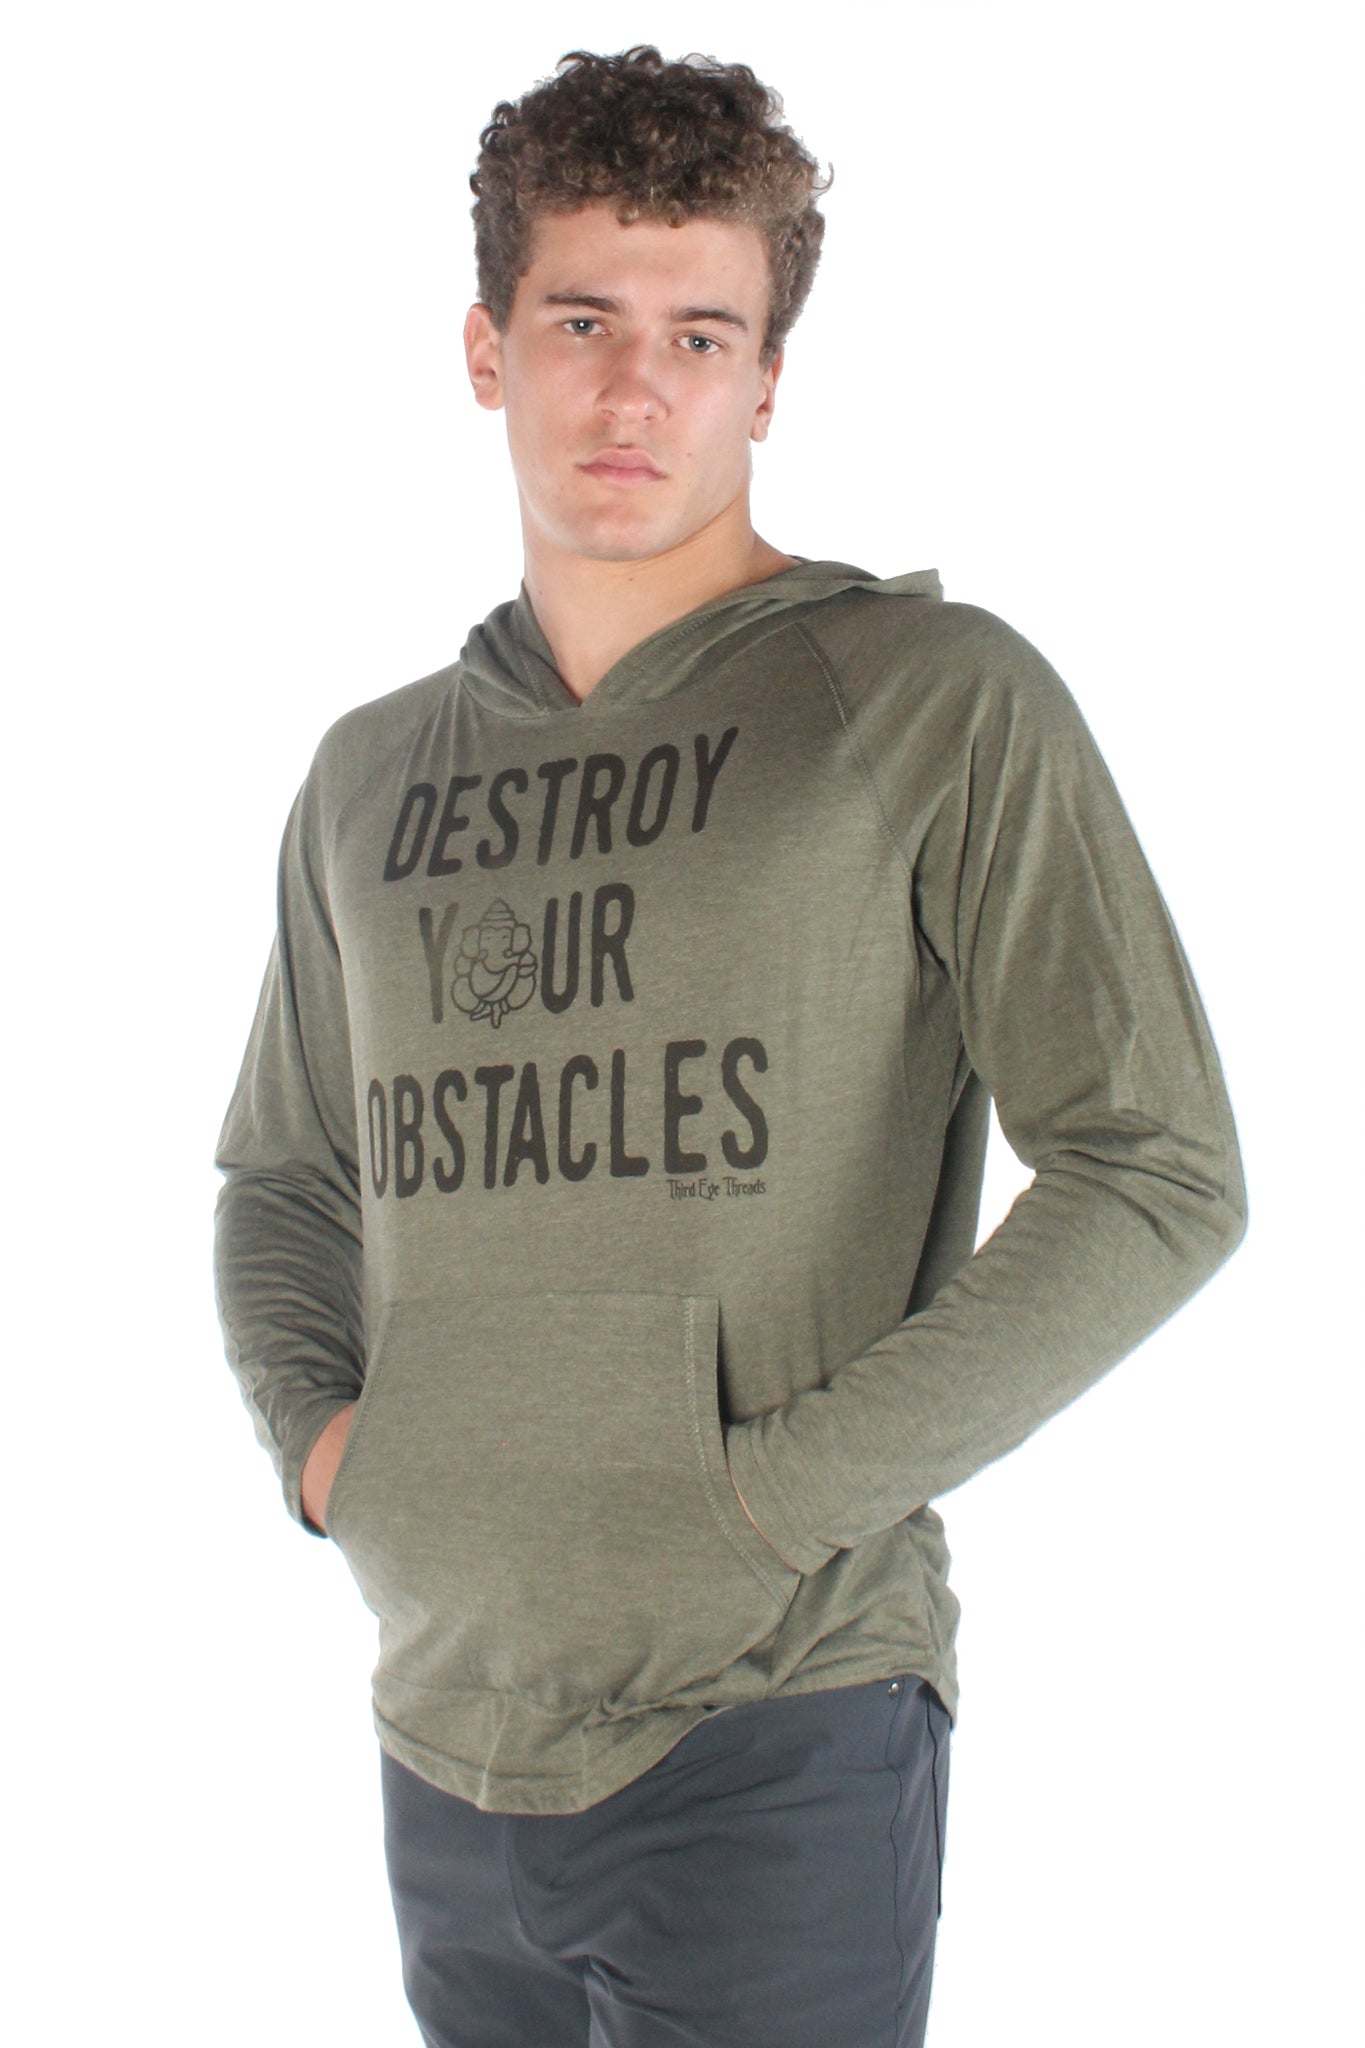 Destroy Your Obstacles On Pull over Hoodie - Third Eye Threads